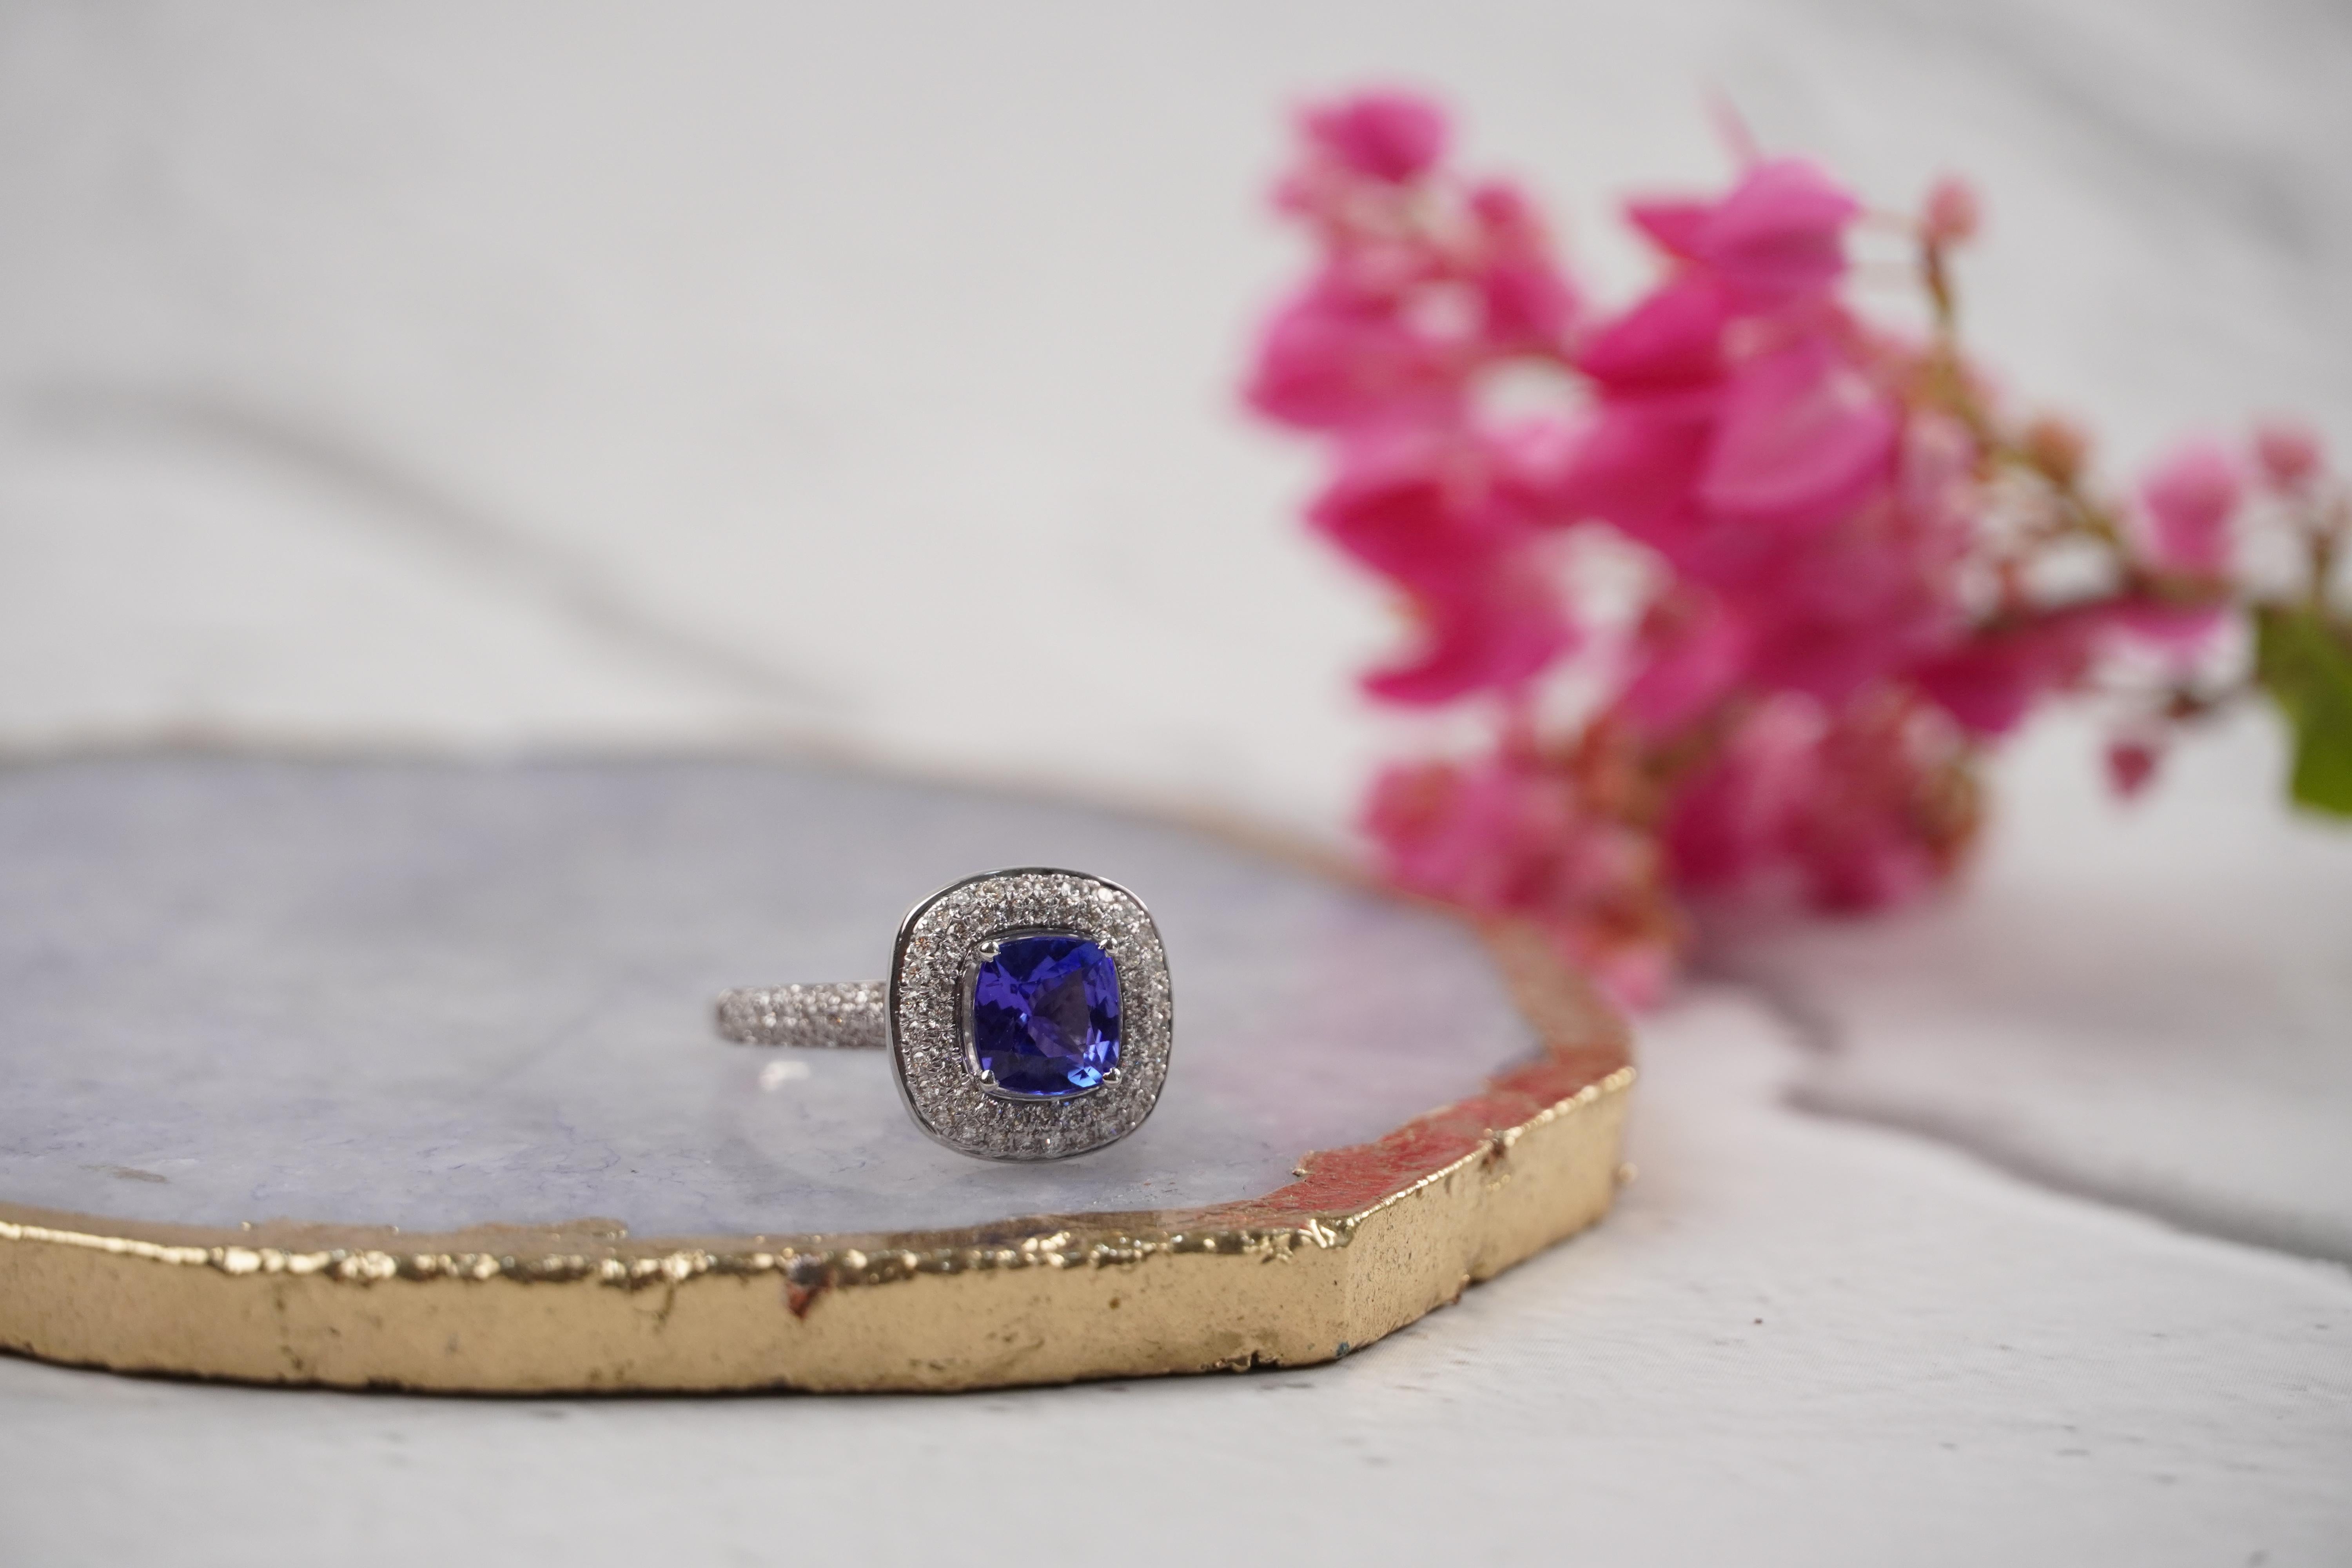 For Sale:  Tanzanite Gemstone Engagement Ring with Diamonds in 18K White Gold 2